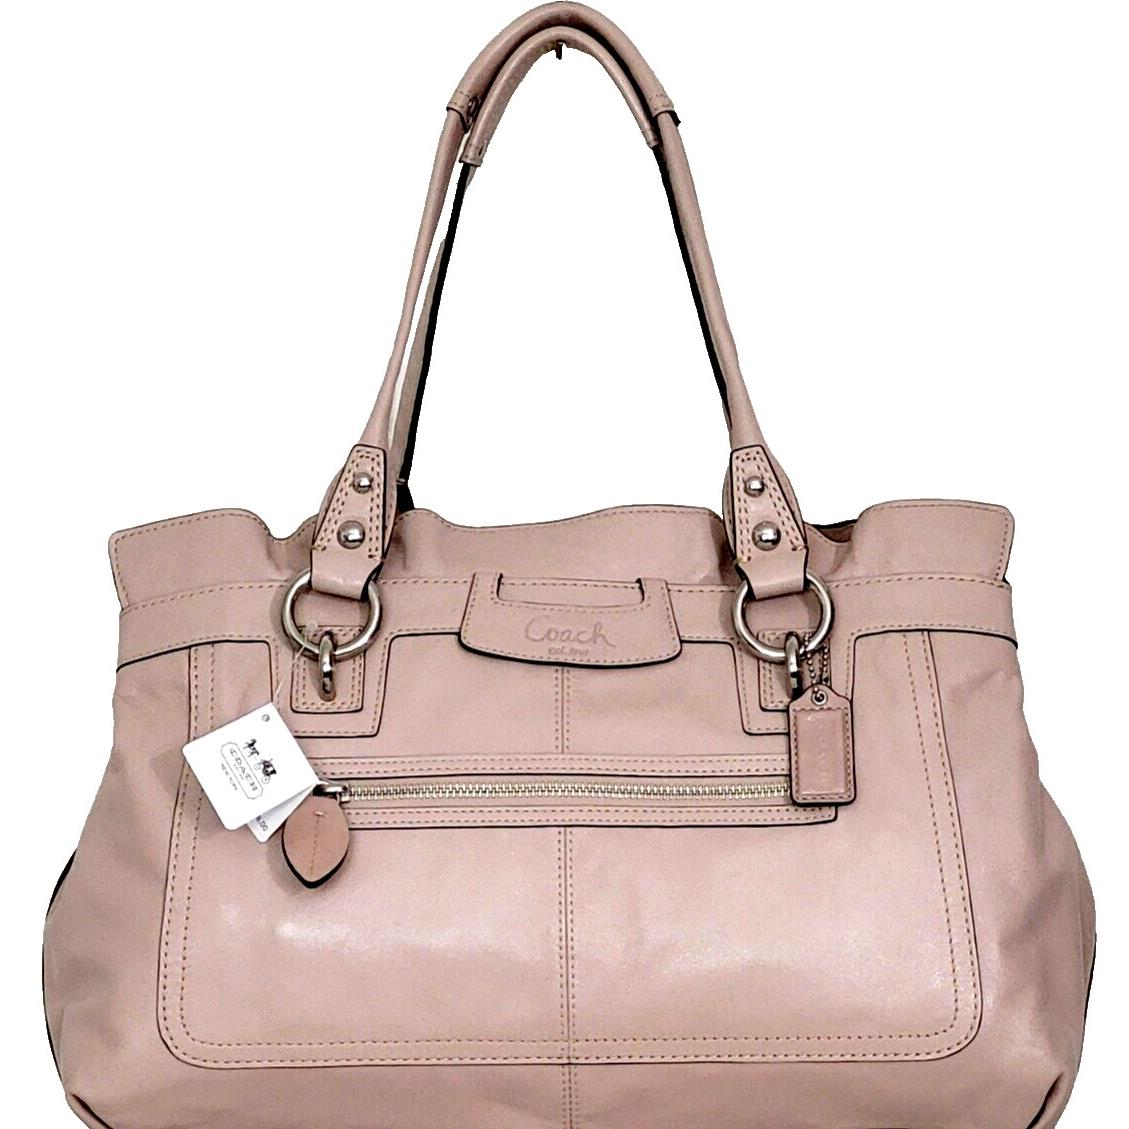 Coach Penelope Z20902 Shell Parchment Pink Leather Large Shopper Tote Bag